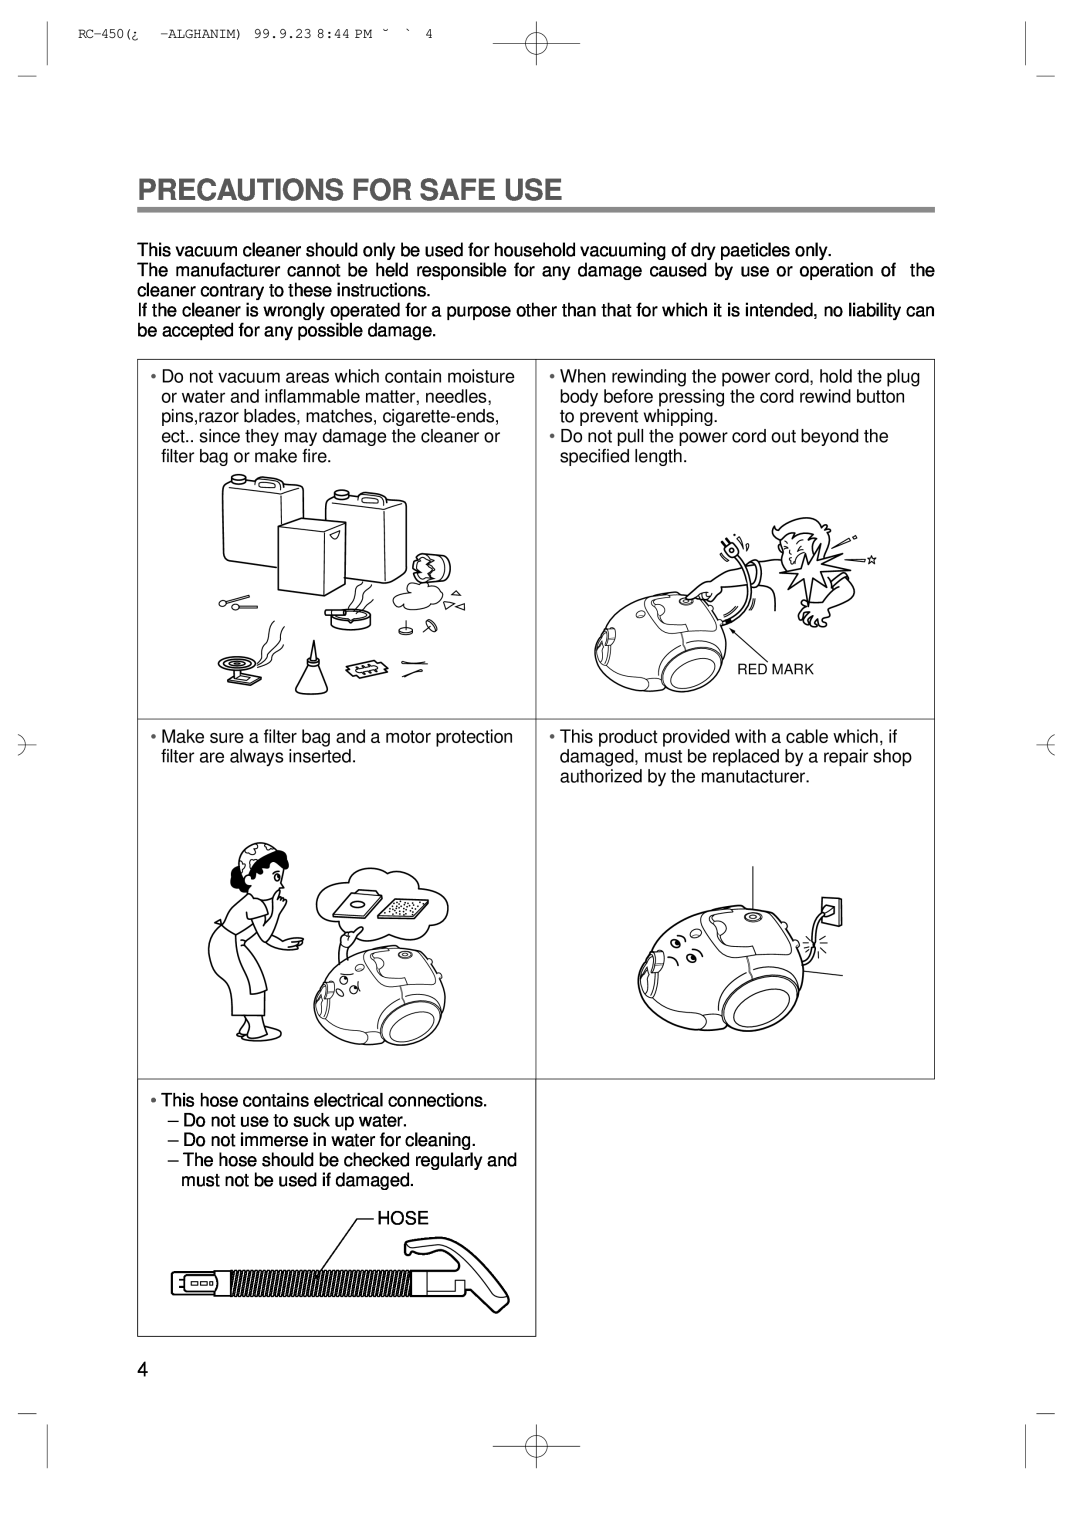 Daewoo RC-450 owner manual Precautions For Safe Use 